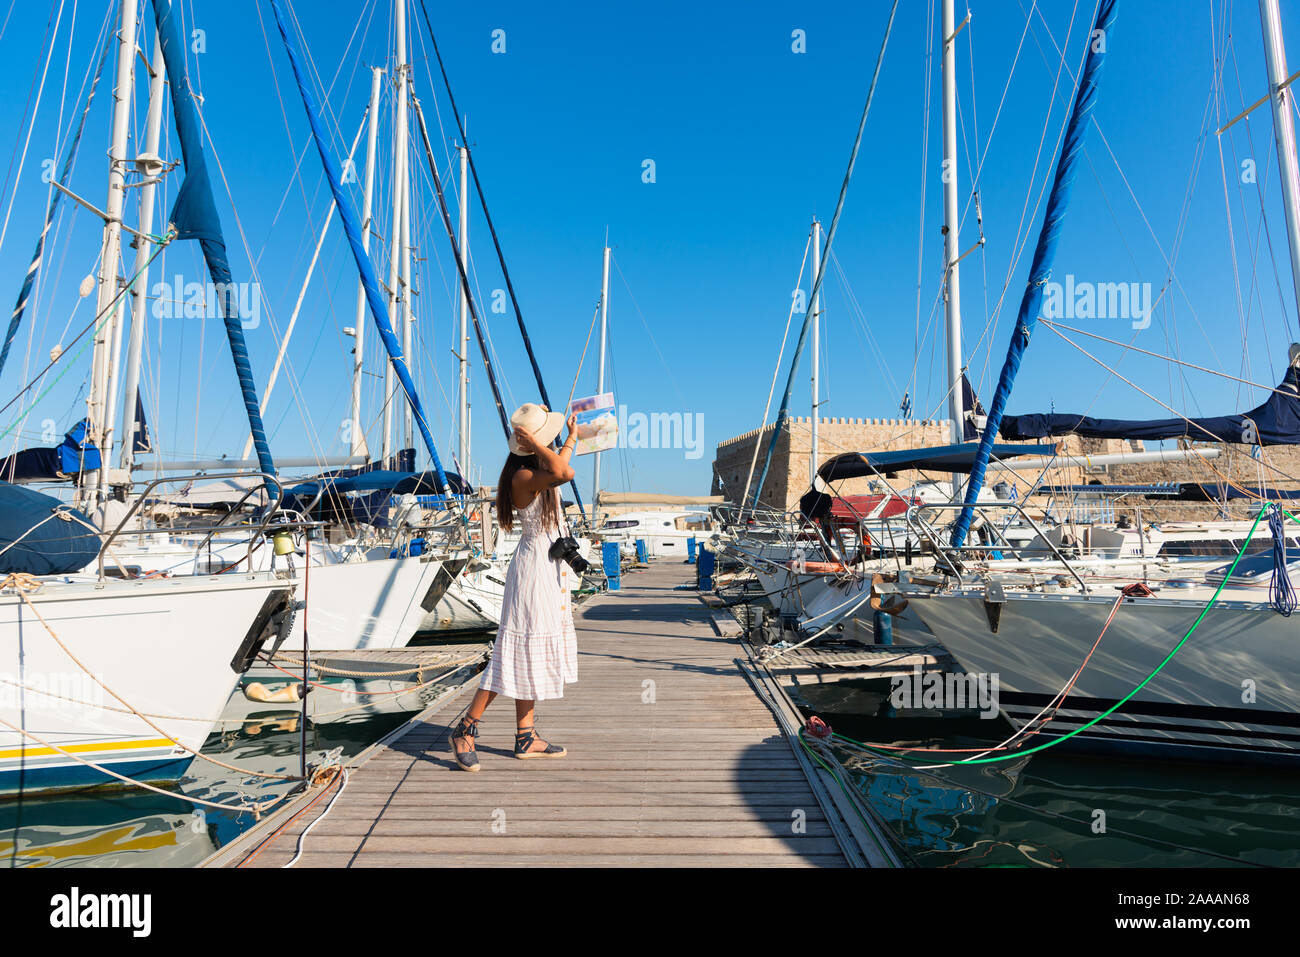 Elegant young tourist visitor woman walking on a sightseeing tour at Heraklion Venetian port, Crete, Greece . Venetian fortress Rocca A Mare or Stock Photo